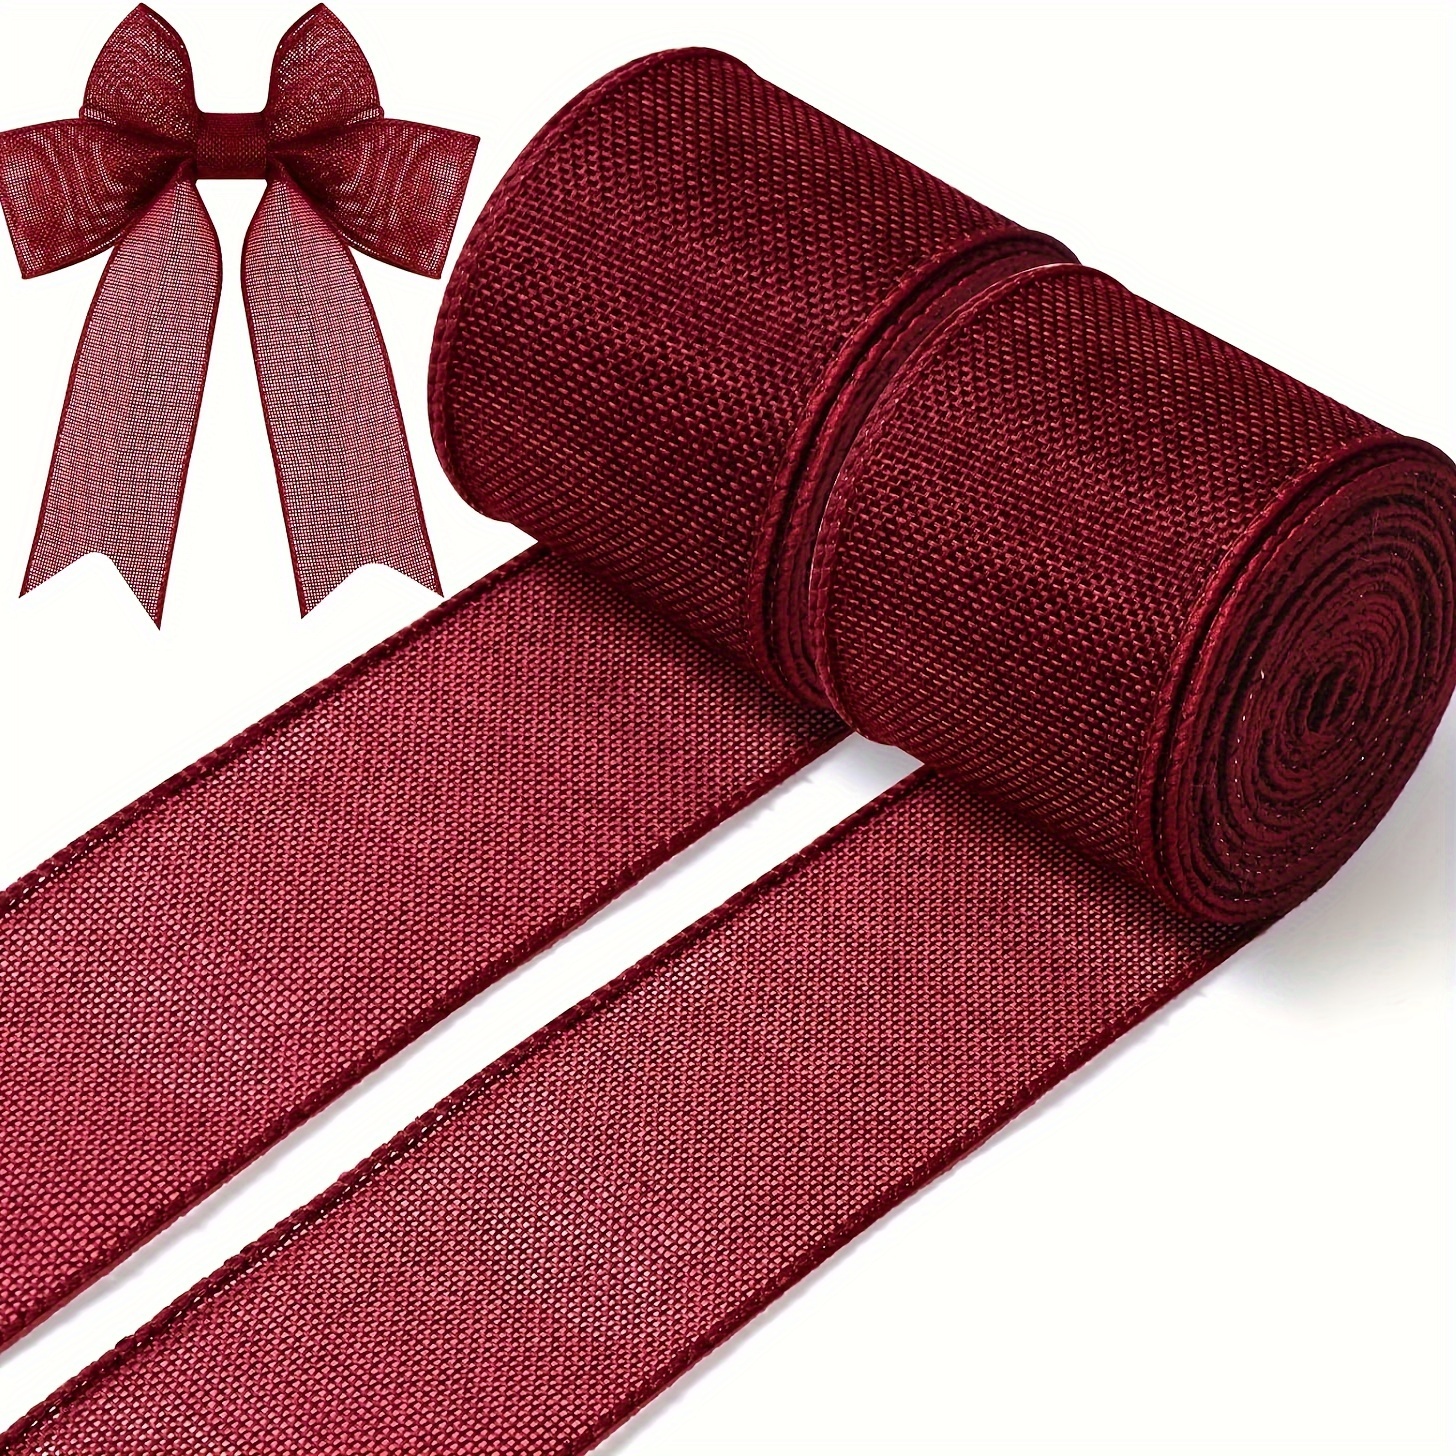  2 Rolls Christmas Velvet Ribbon Velvet Wired Edge Ribbon Trim  Wrapping Ribbon Craft Fabric Ribbon for Xmas Bow Making, Floral Arrangement  Decoration (Red,2.5 Inch x 6.5 Yard)